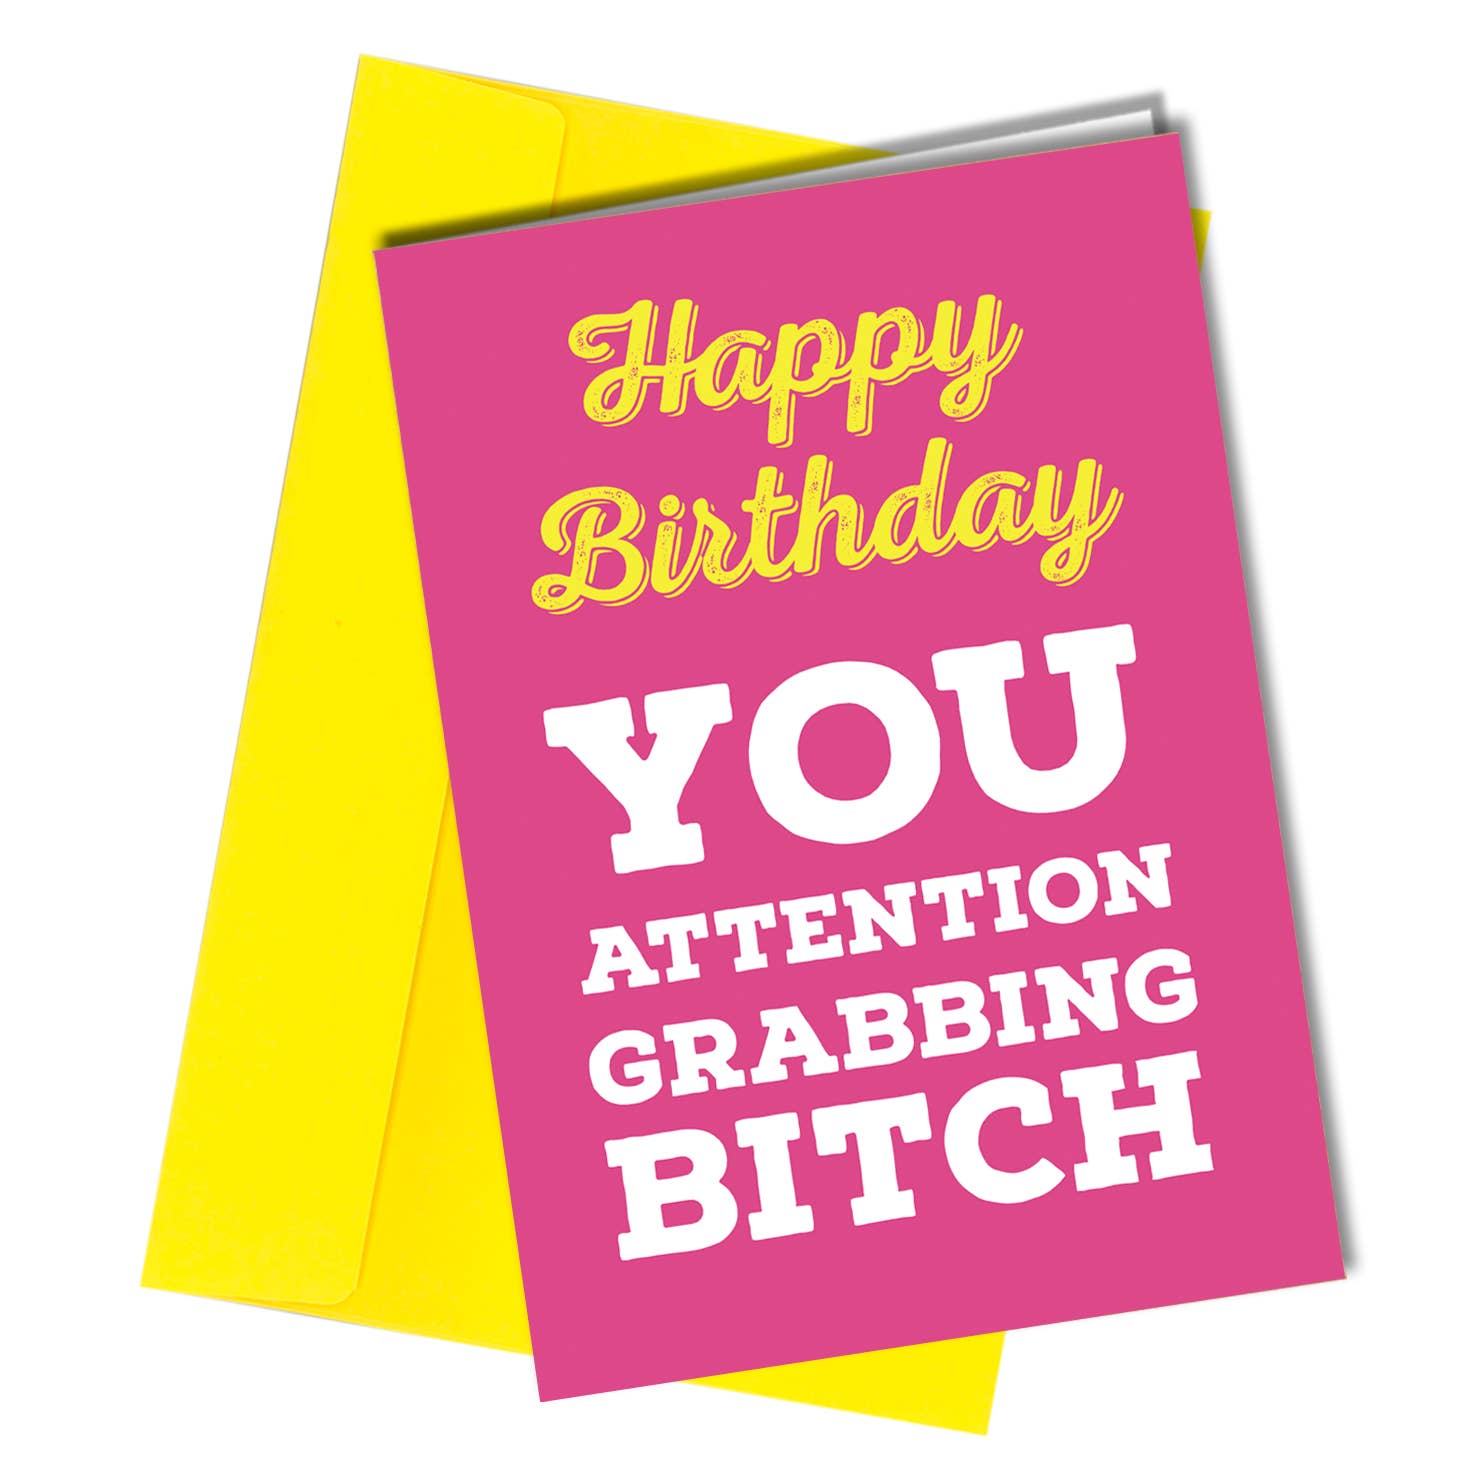 #297 Attention grabbing | birthday card | Best Friend Close to the Bone Greeting Cards and Gifts